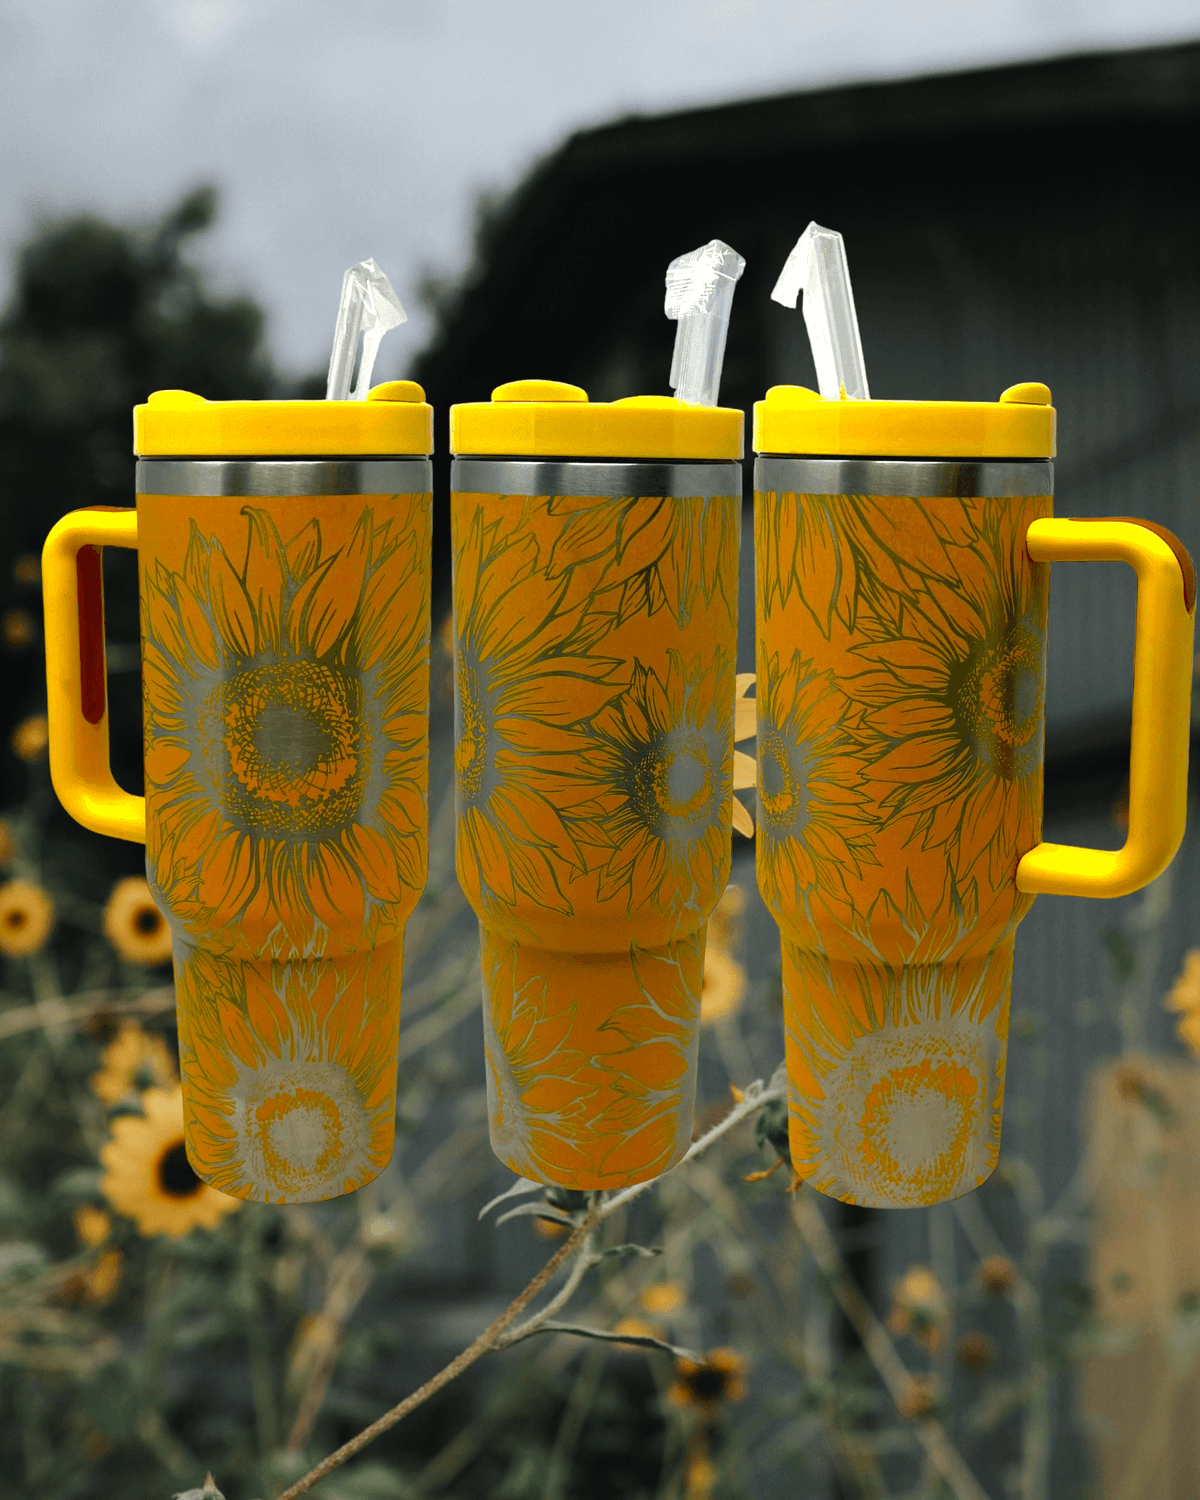 https://cdn.shopify.com/s/files/1/0606/5497/7184/files/wind_river_outpost_40_oz_stanley_dupe_sunflowers_tumbler_2_1200x.png?v=1690330121